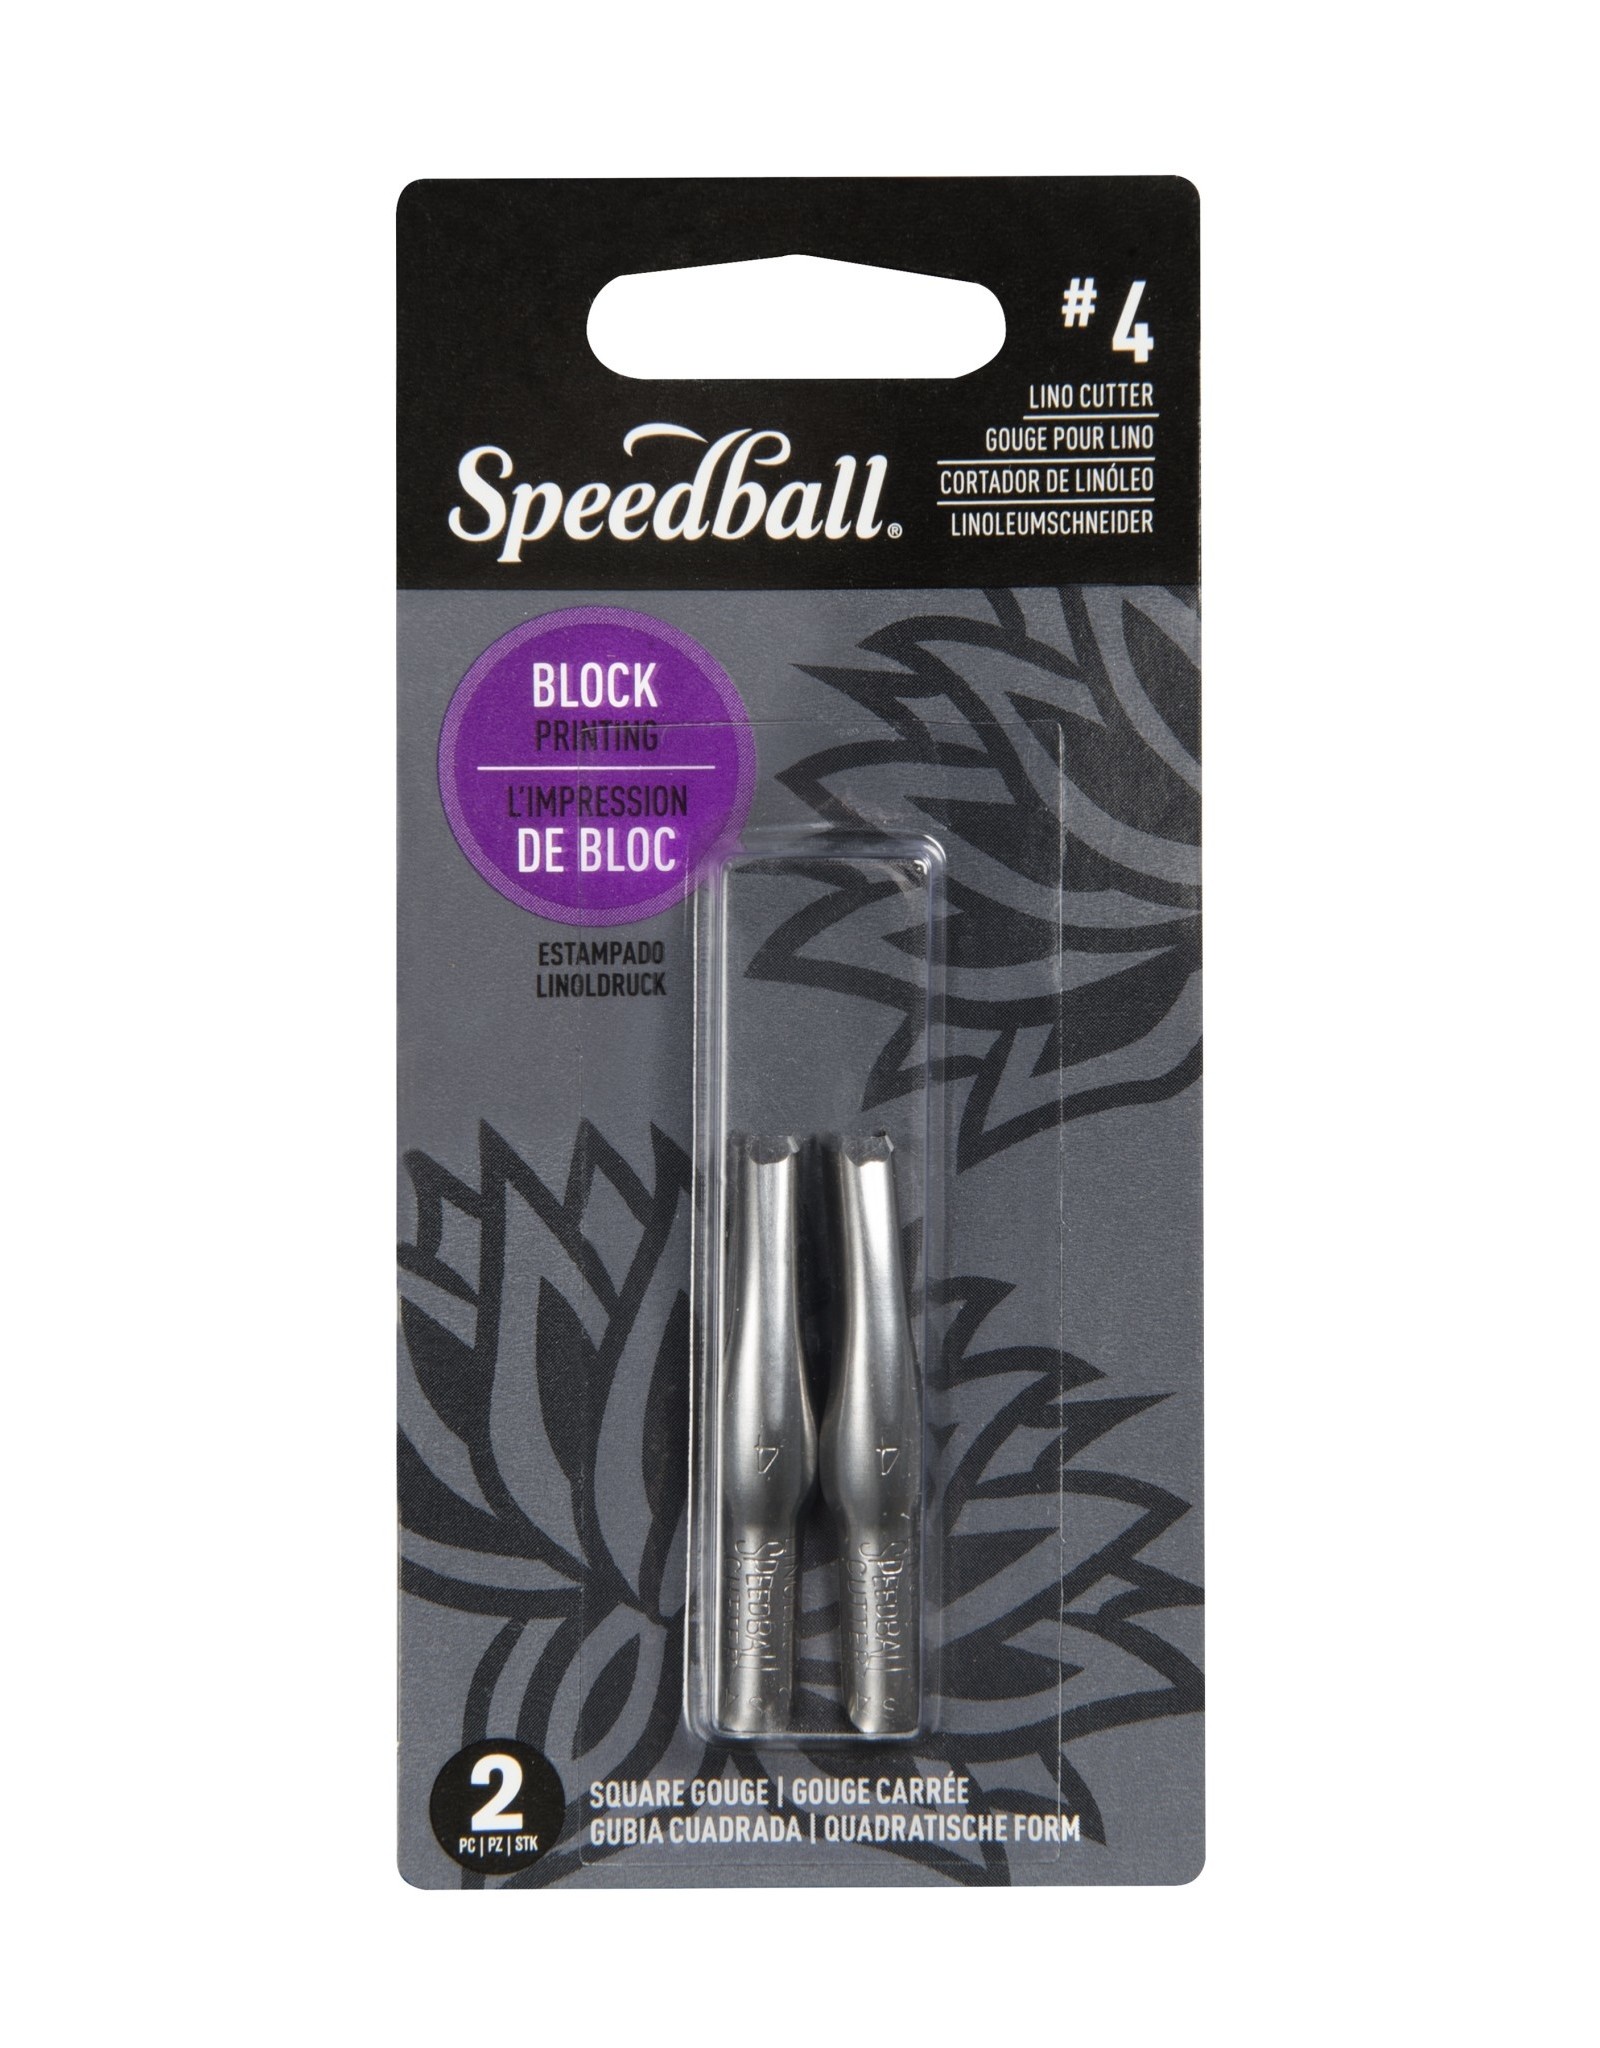 SPEEDBALL ART PRODUCTS Speedball Lino Cutter, #4 Square Gouge, Set of 2